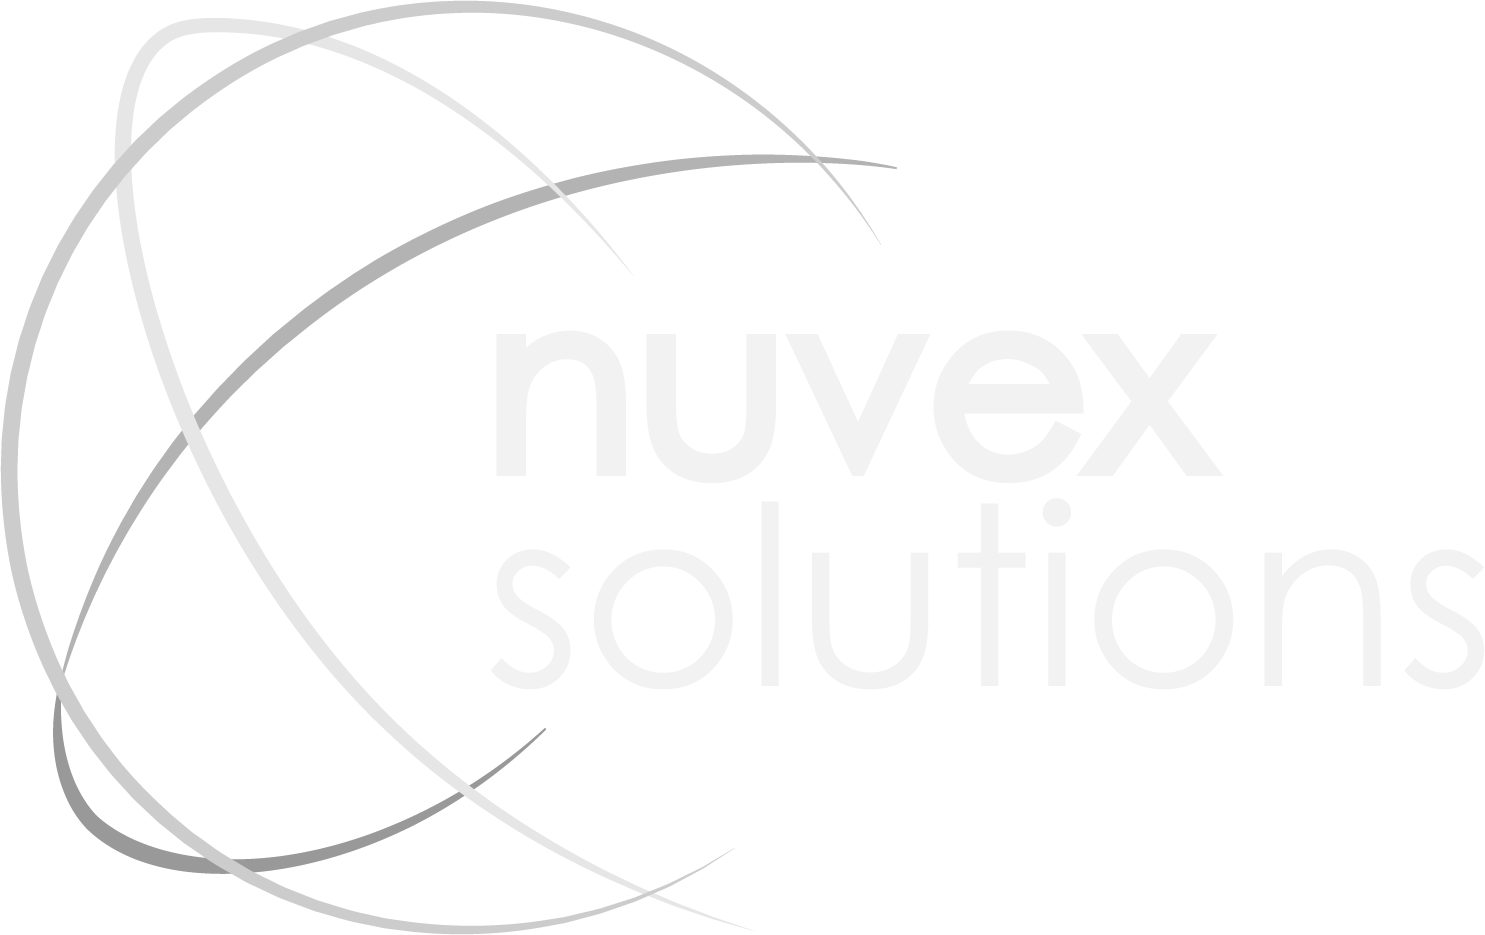 Nuvex Solutions